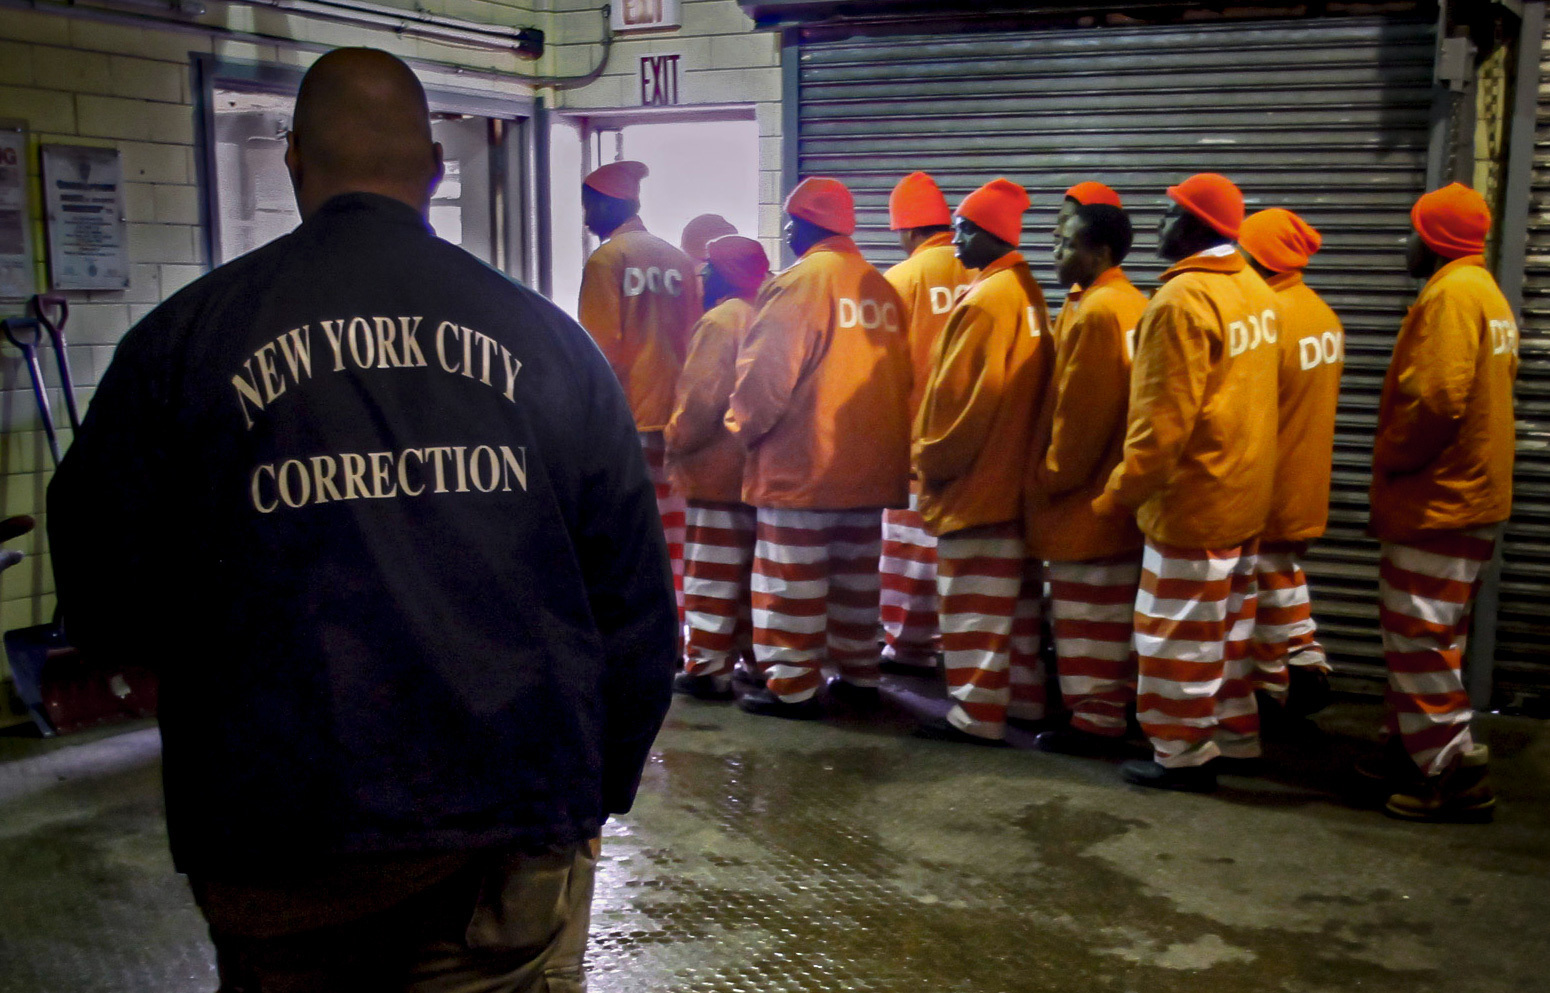 Rikers Island inmate claims he was sexually assaulted by correction officer while suffering from COVID-19